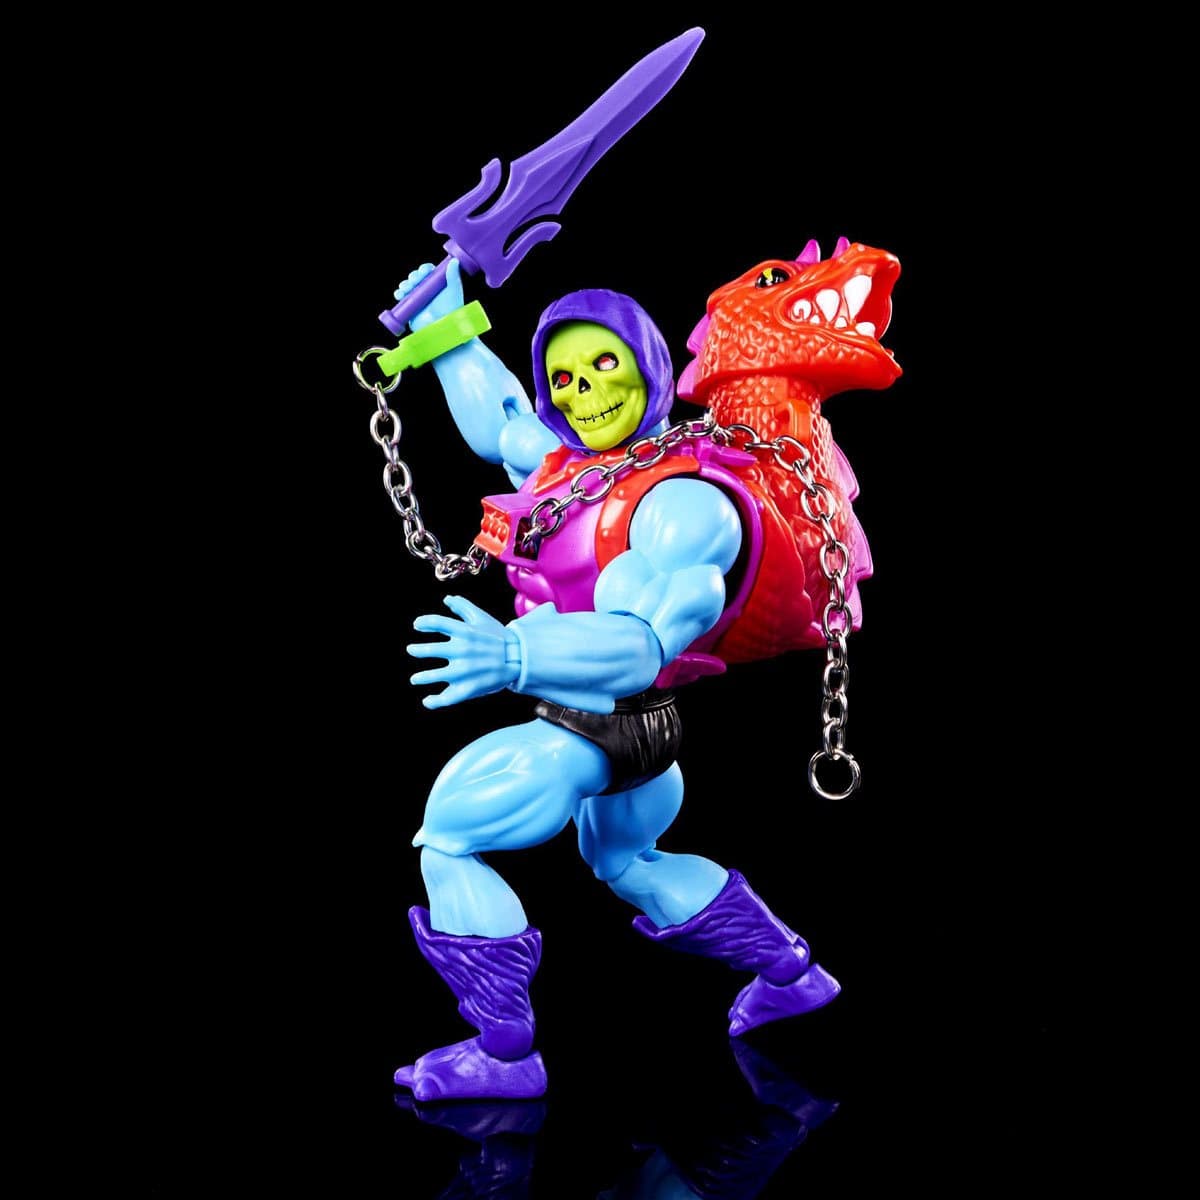 Masters of the Universe Dragon Blaster Skeletor Deluxe 5 1/2" Action Figure - Pop-O-Loco - Mattel